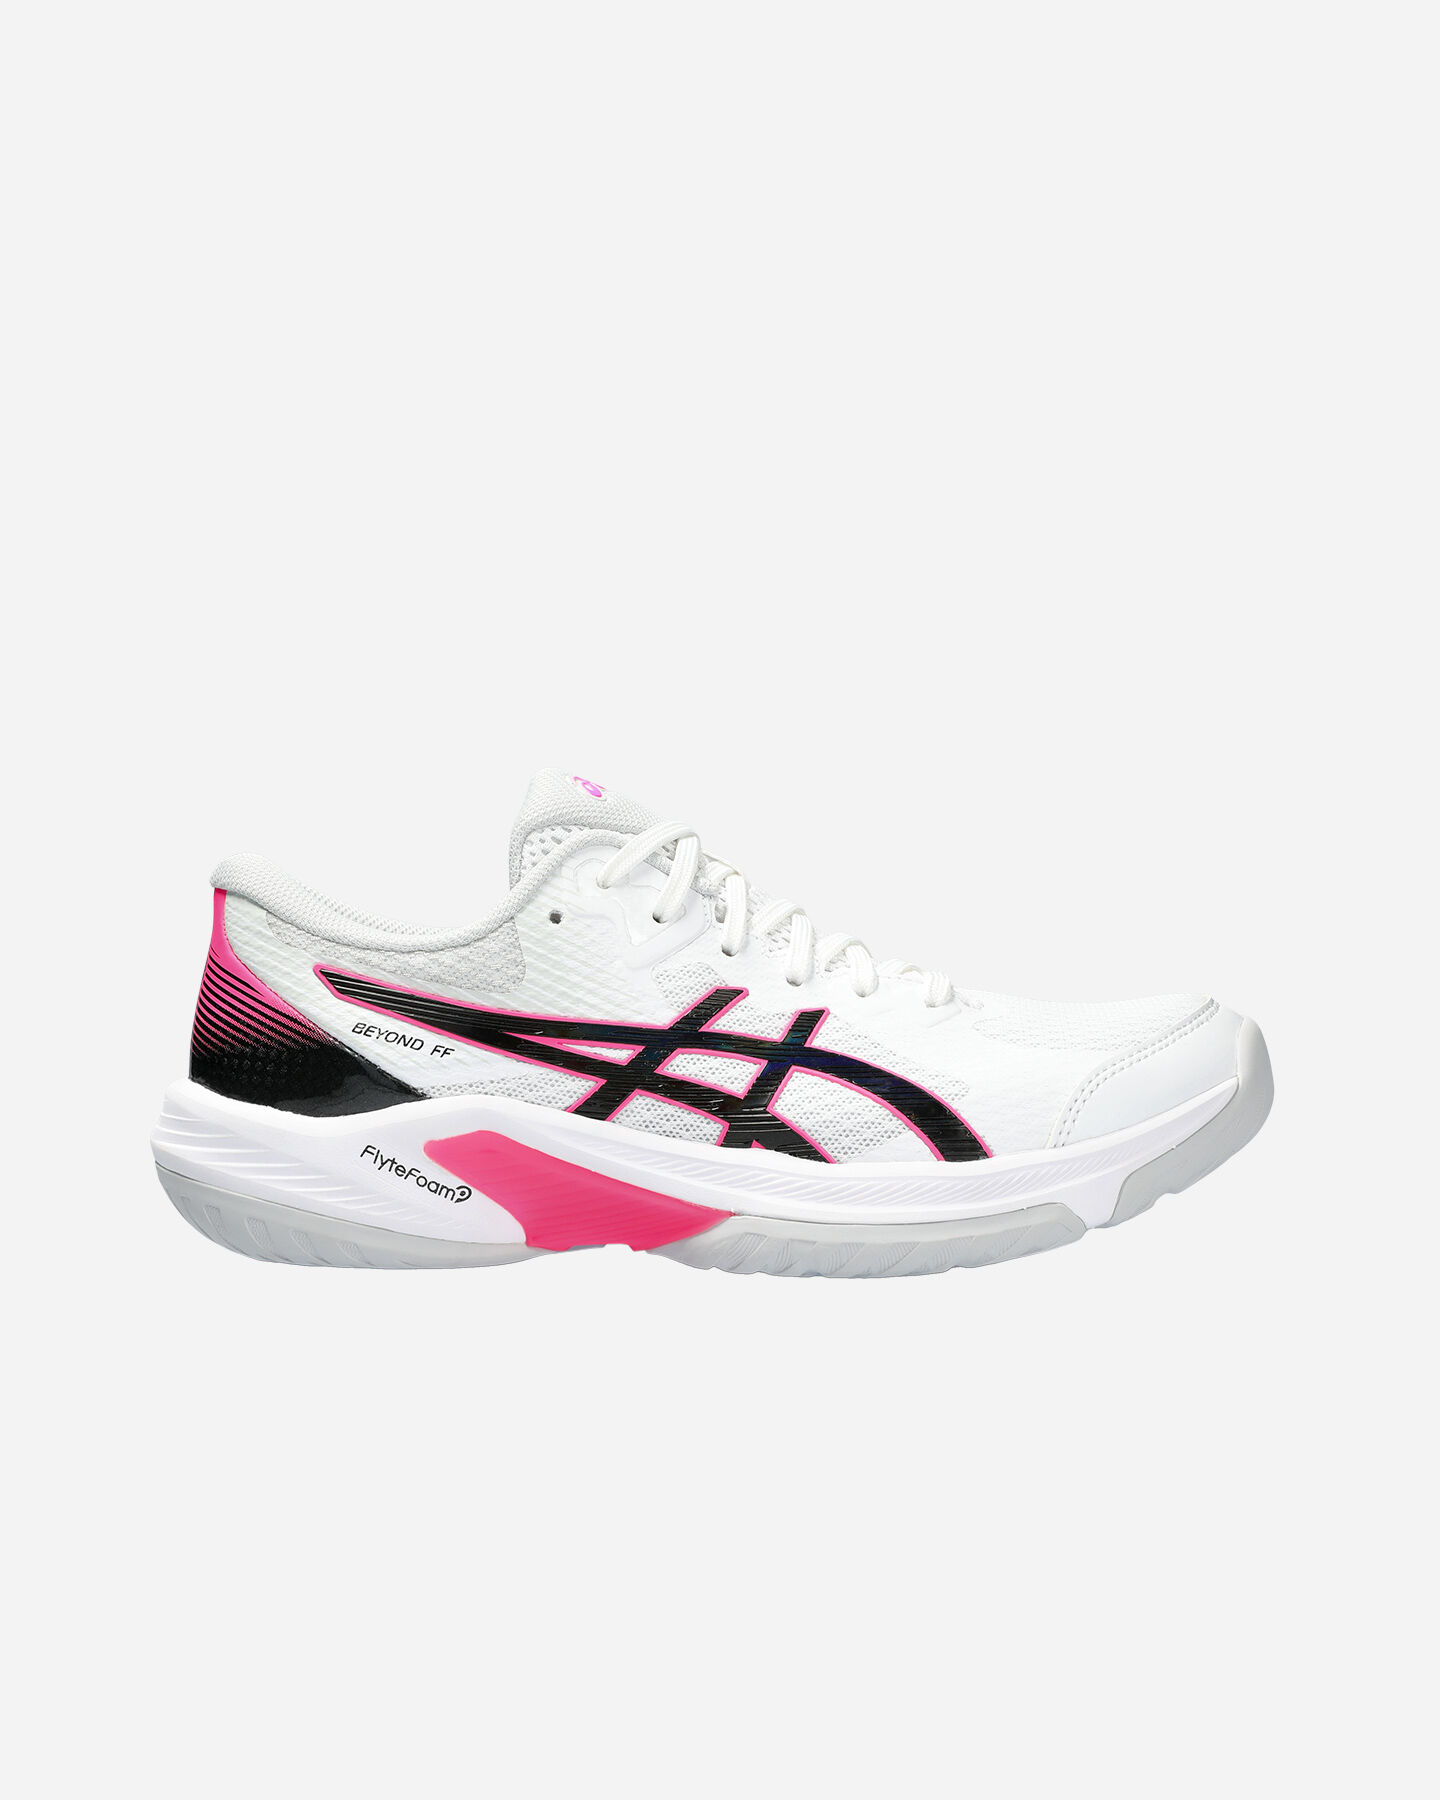  Scarpe volley ASICS BEYOND W S5585397|101|6H scatto 0